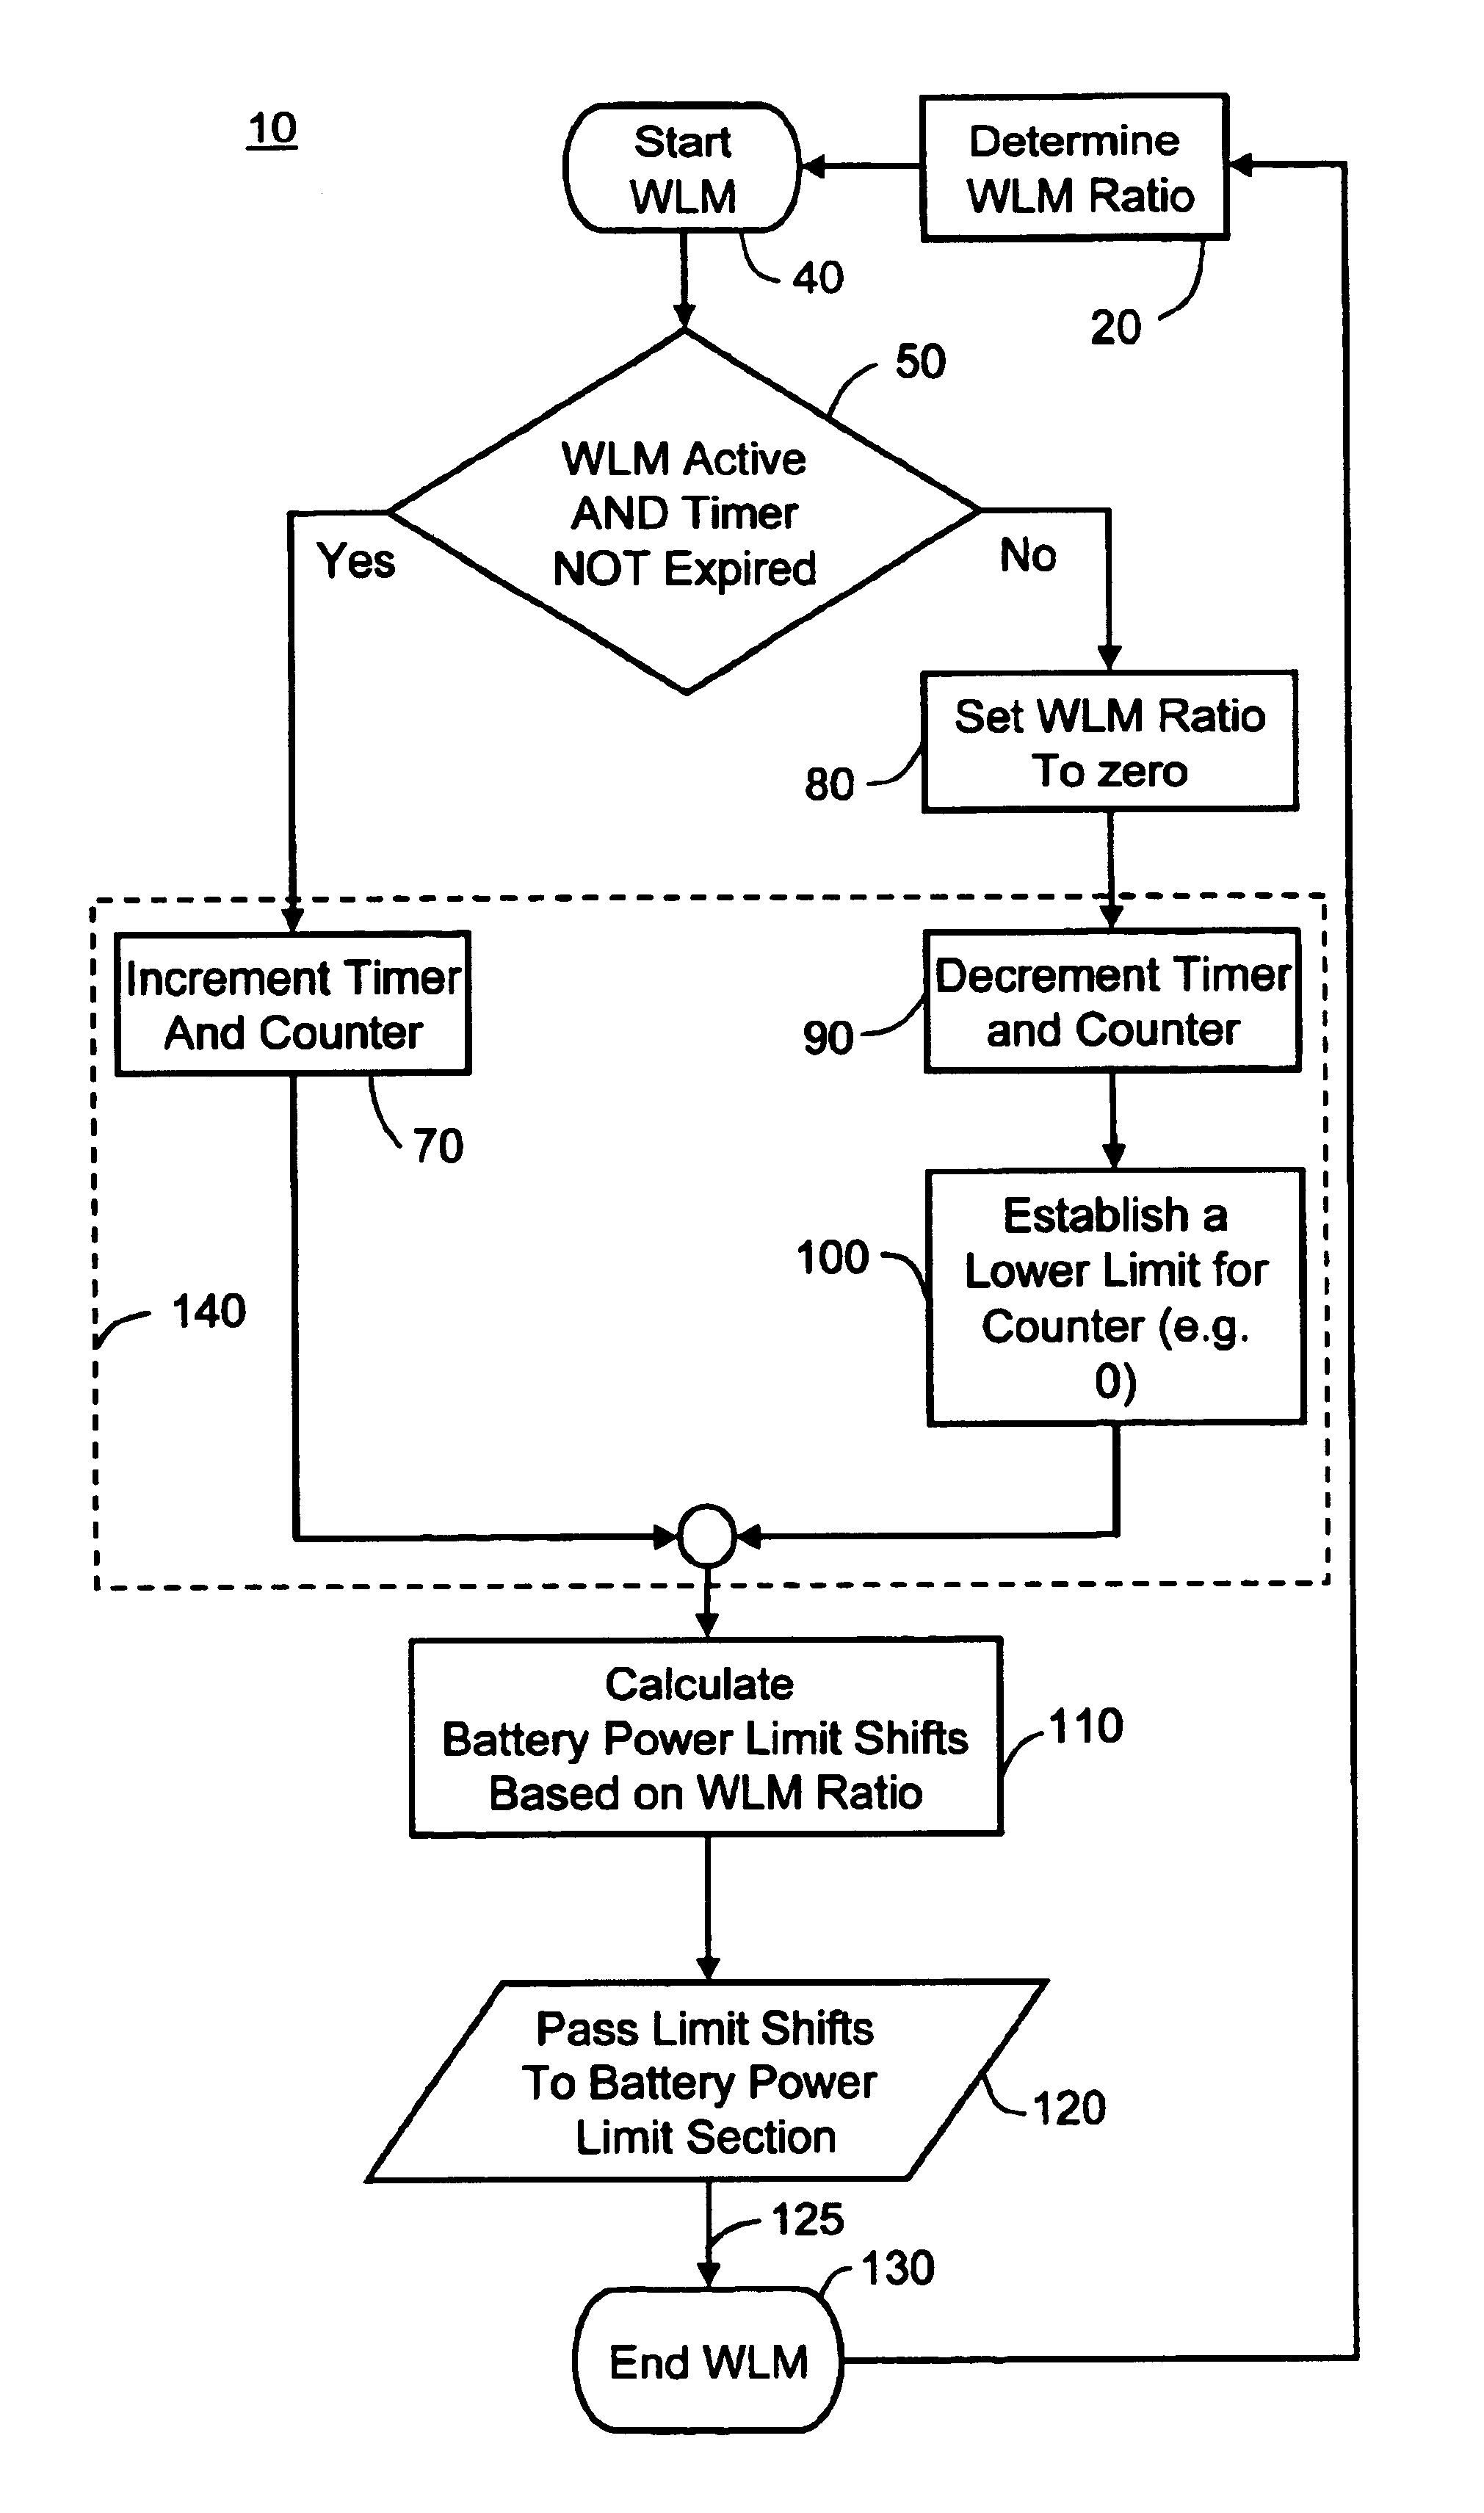 Method for adjusting battery power limits in a hybrid electric vehicle to provide consistent launch characteristics